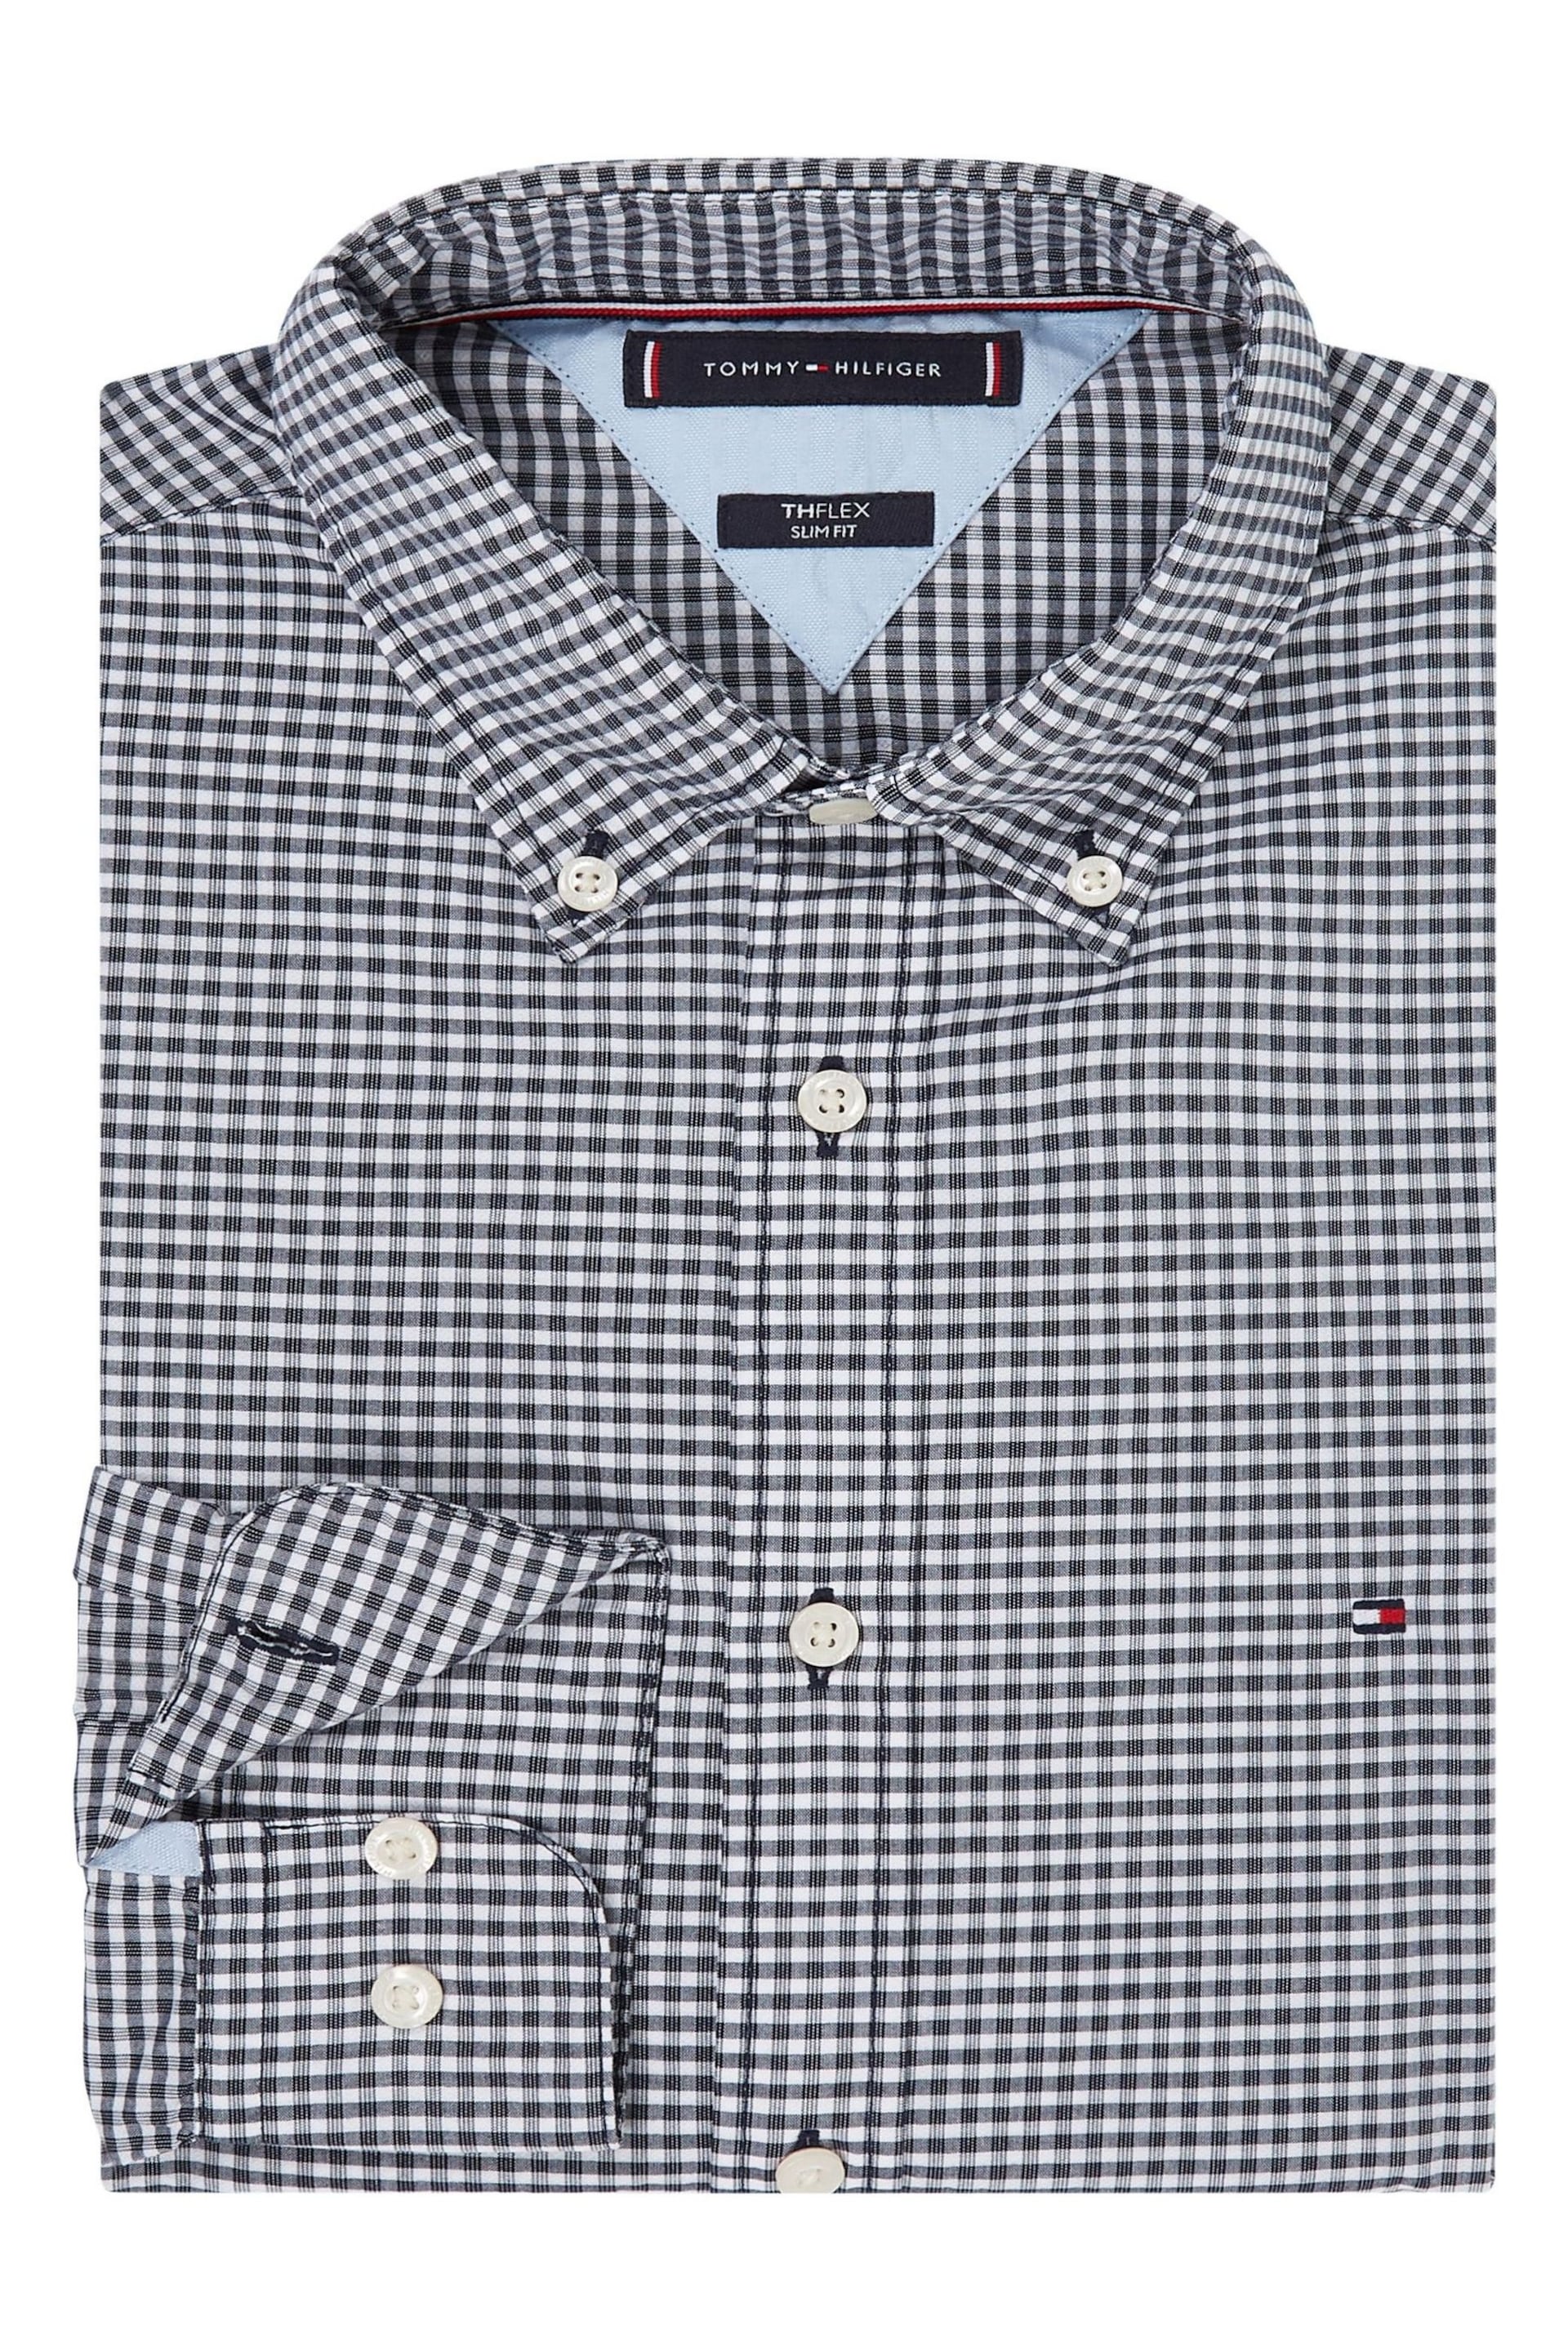 Tommy Hilfiger Blue B&T Textured Gingham Shirt - Image 3 of 4